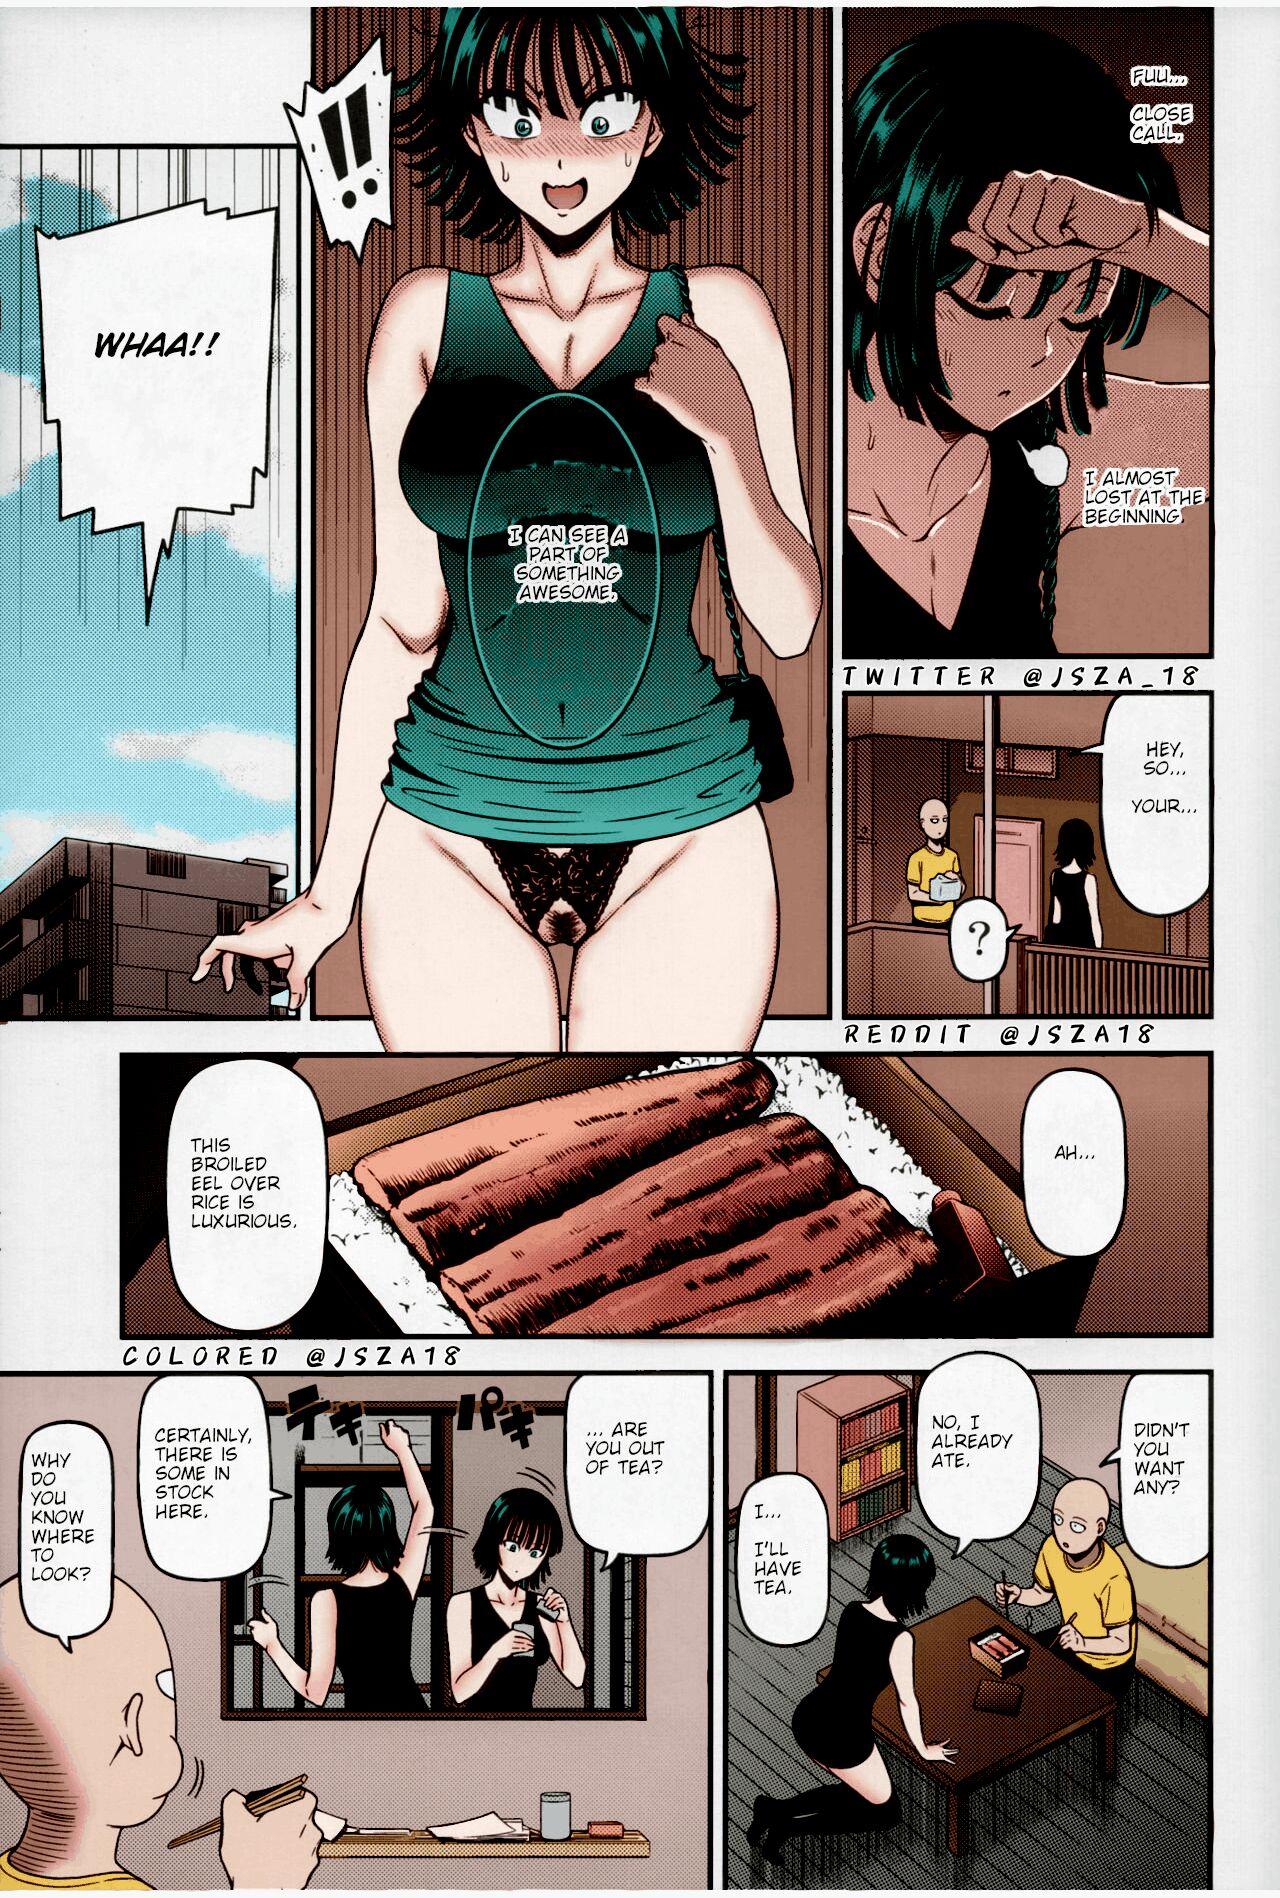 Huge Ass ONE-HURRICANE 6 - One punch man Messy - Page 4